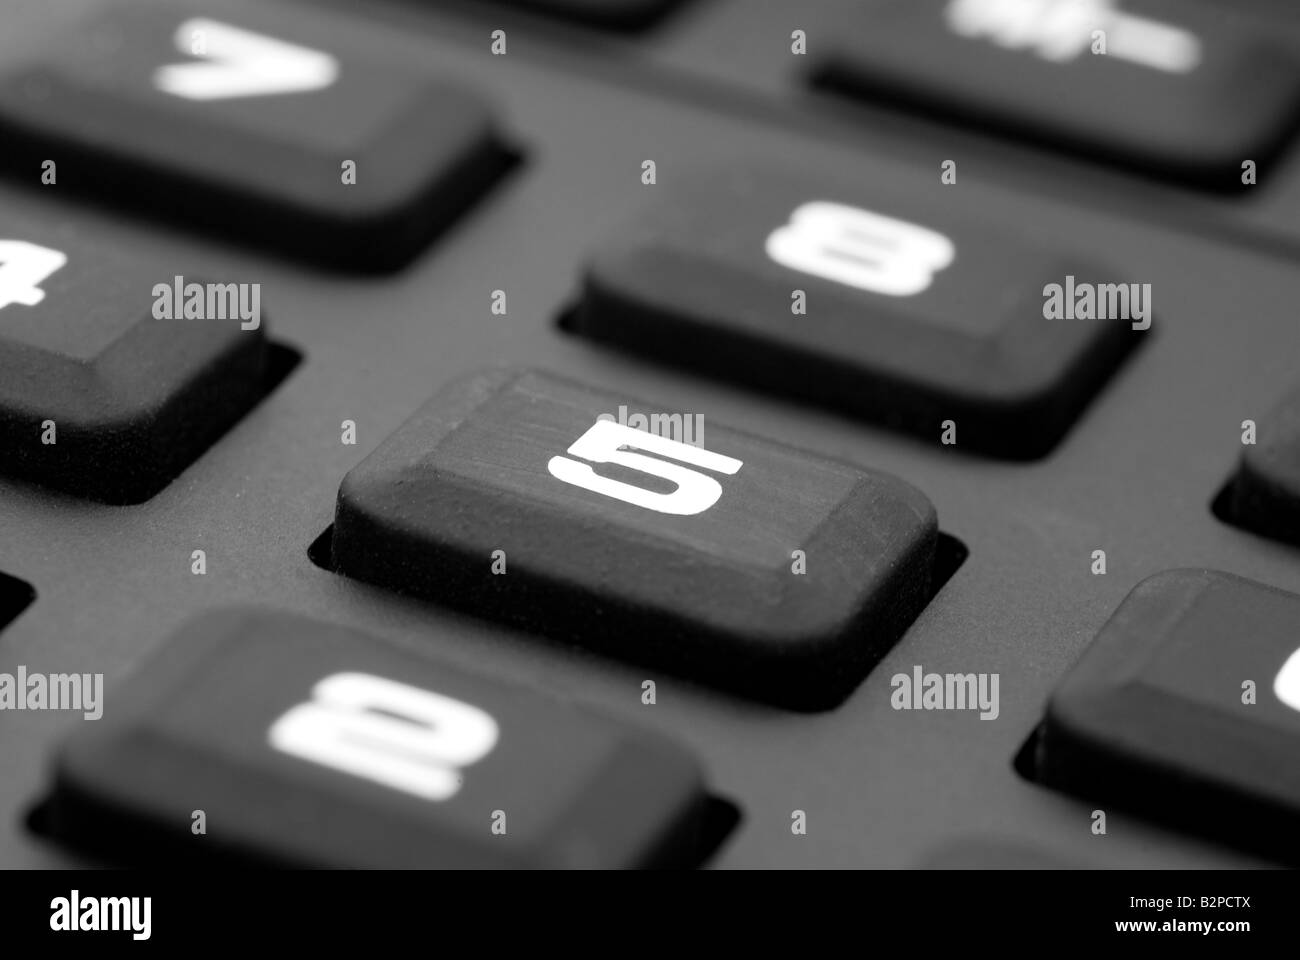 A close up of a rubber keypad of a calculator focused on number 5 Stock Photo